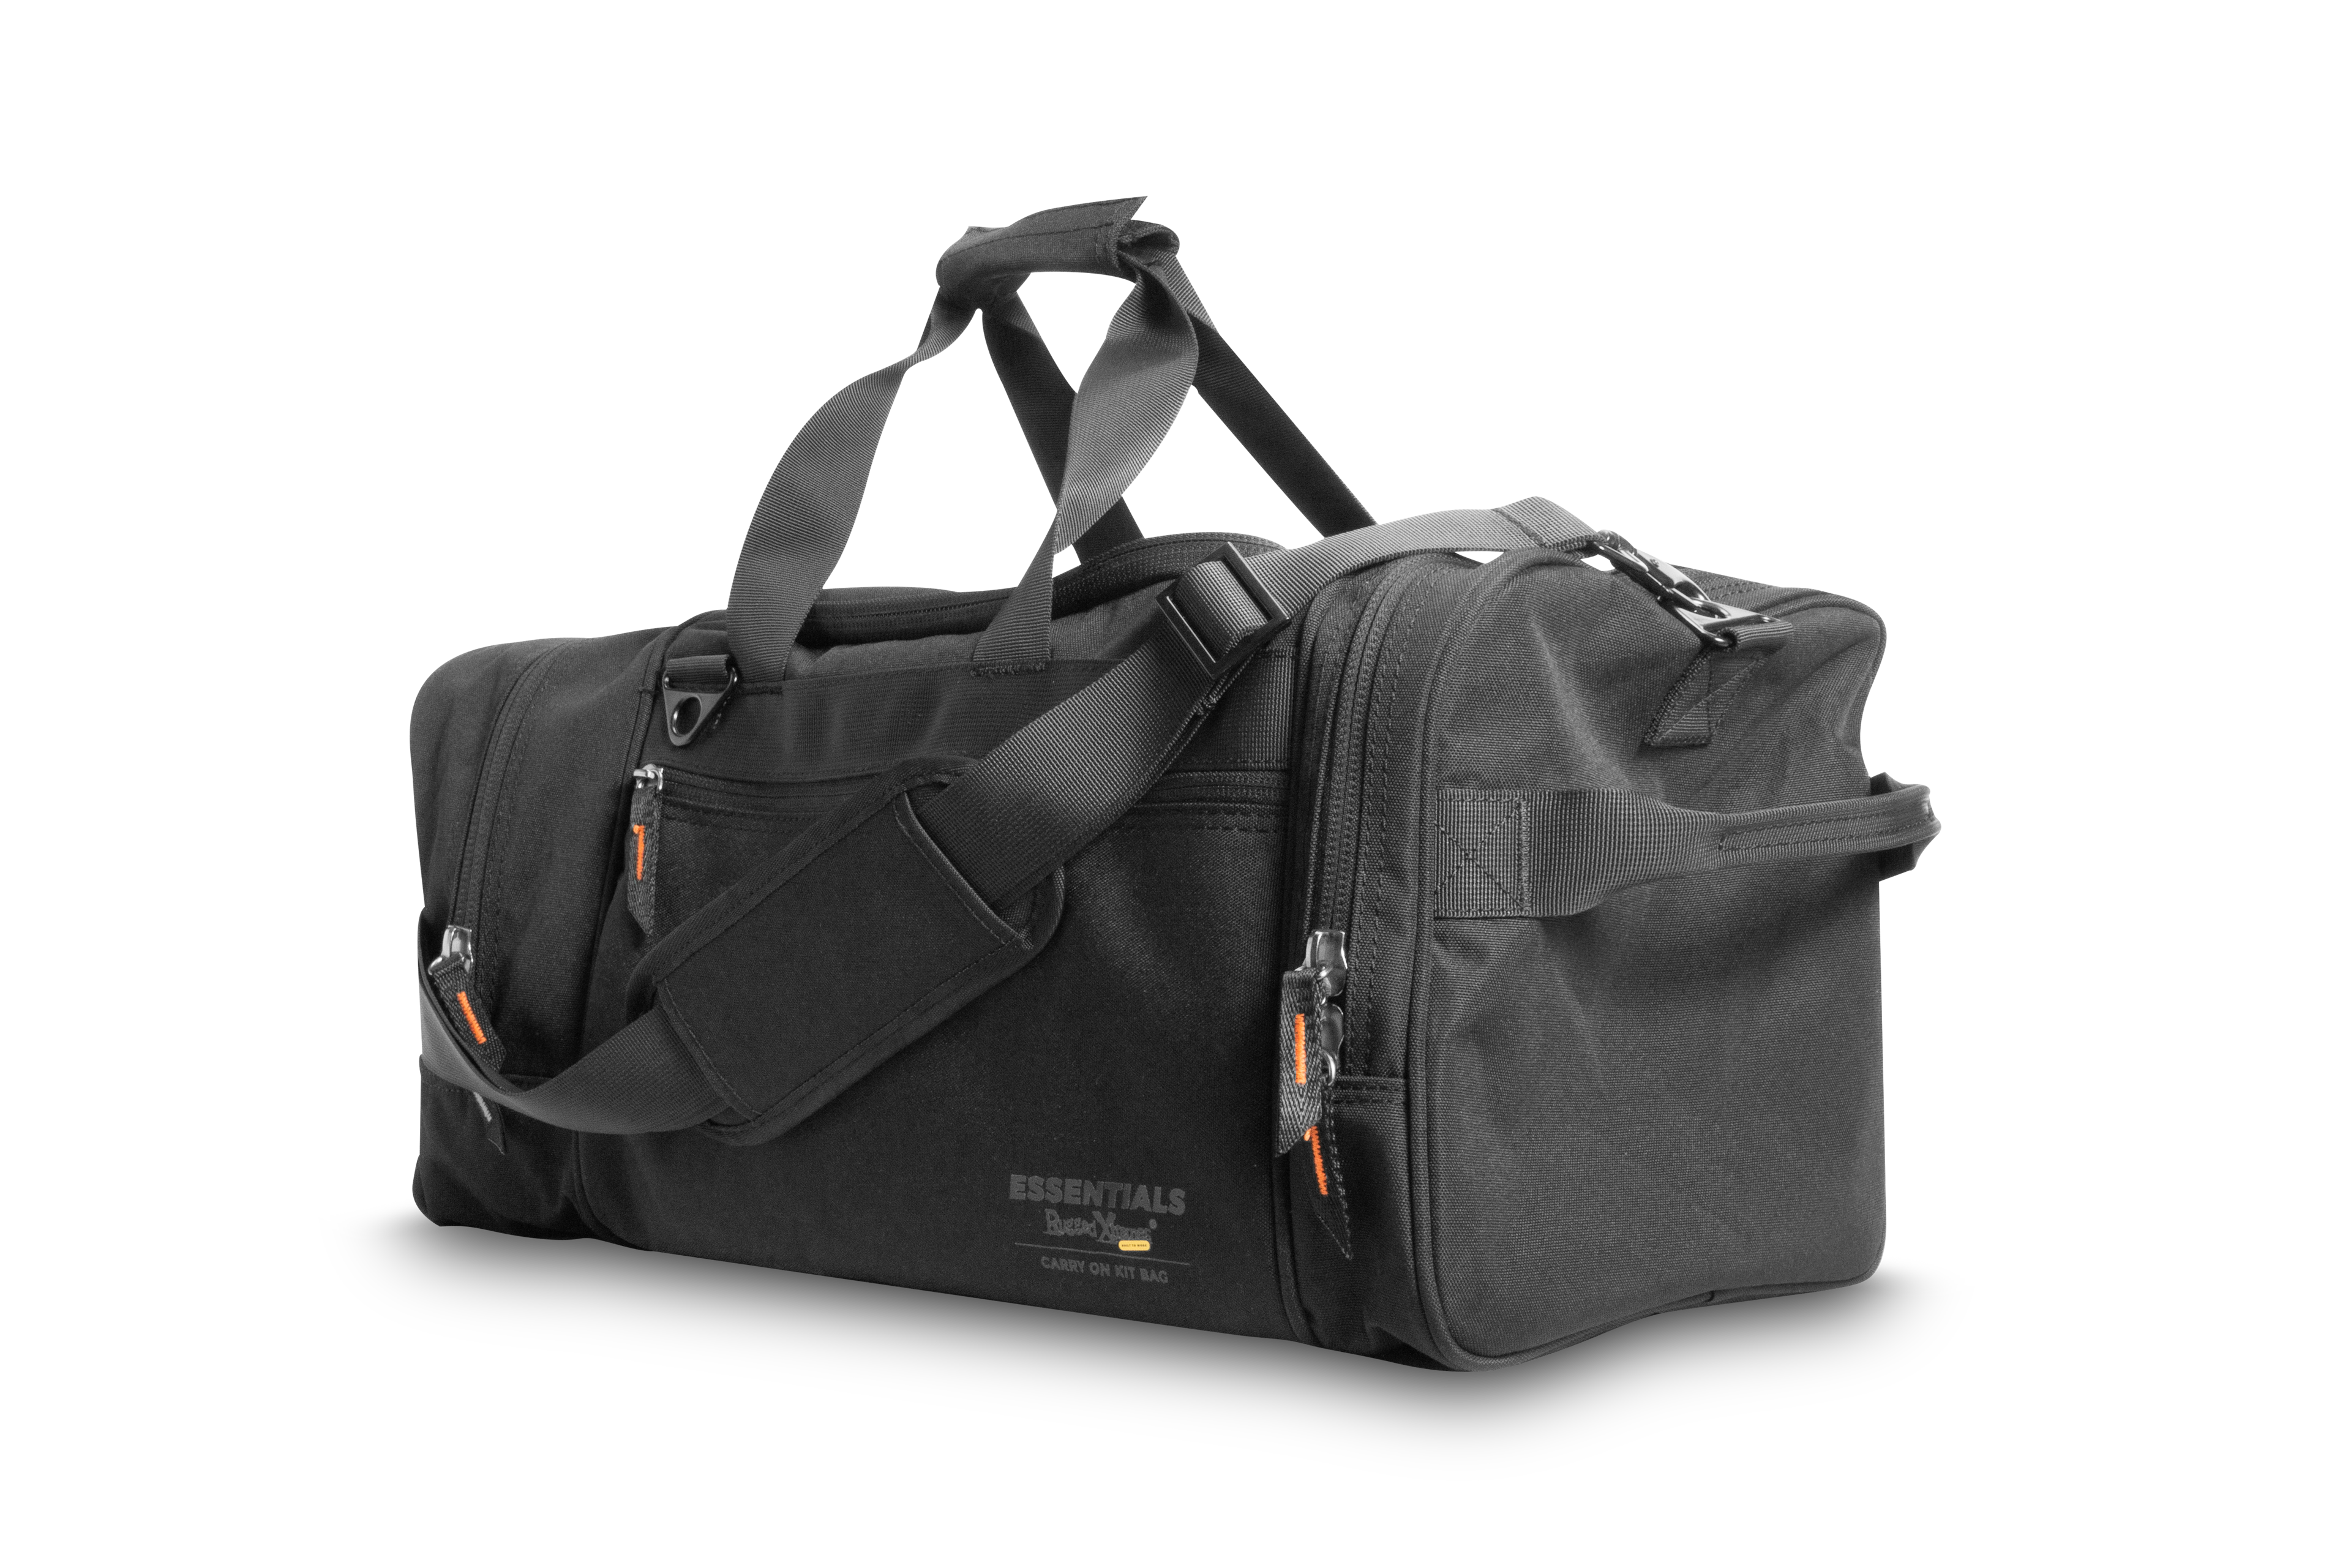 Rugged Xtremes Canvas Carry On Kit Bag